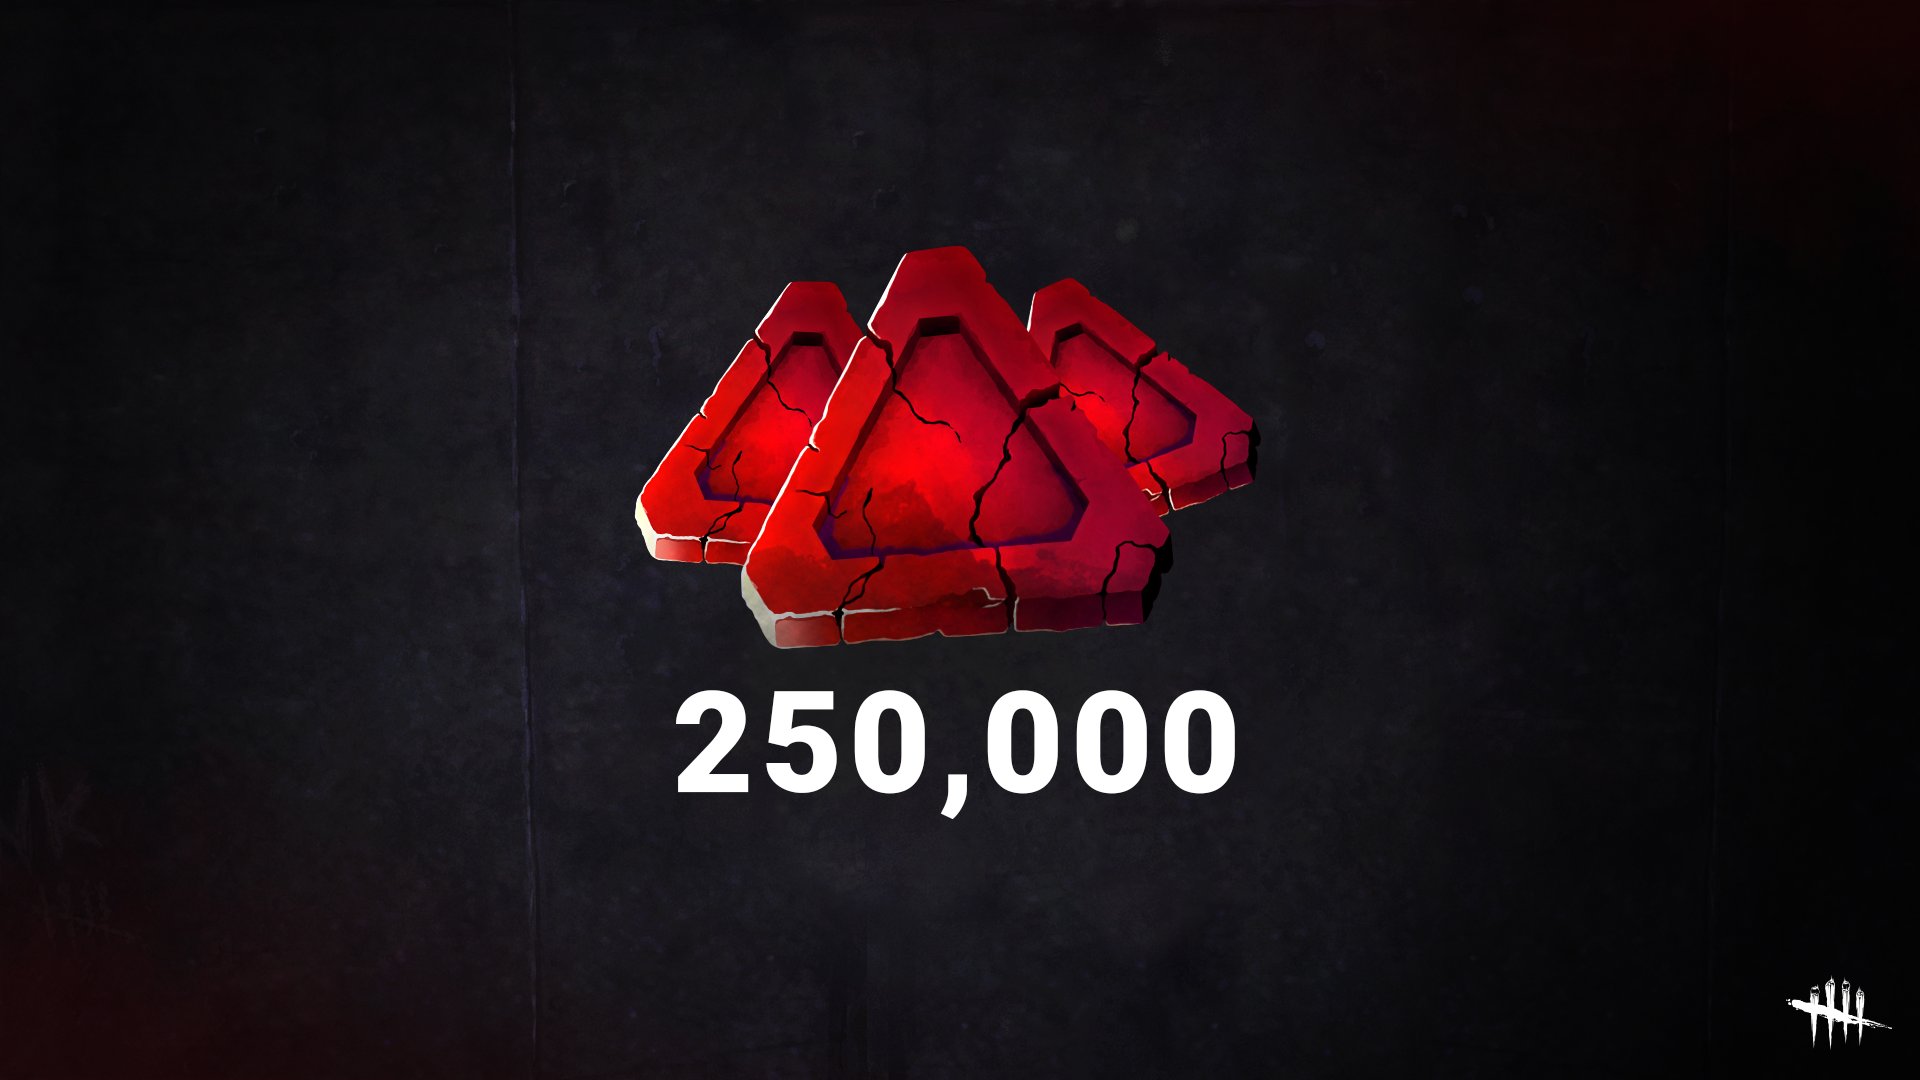 Dead By Daylight Thanks For Sticking With Us As We Work On The Remaining Error Codes 111 112 Login For 250k Bloodpoints On Us Deadbydaylight Dbd T Co 5ypu451phz